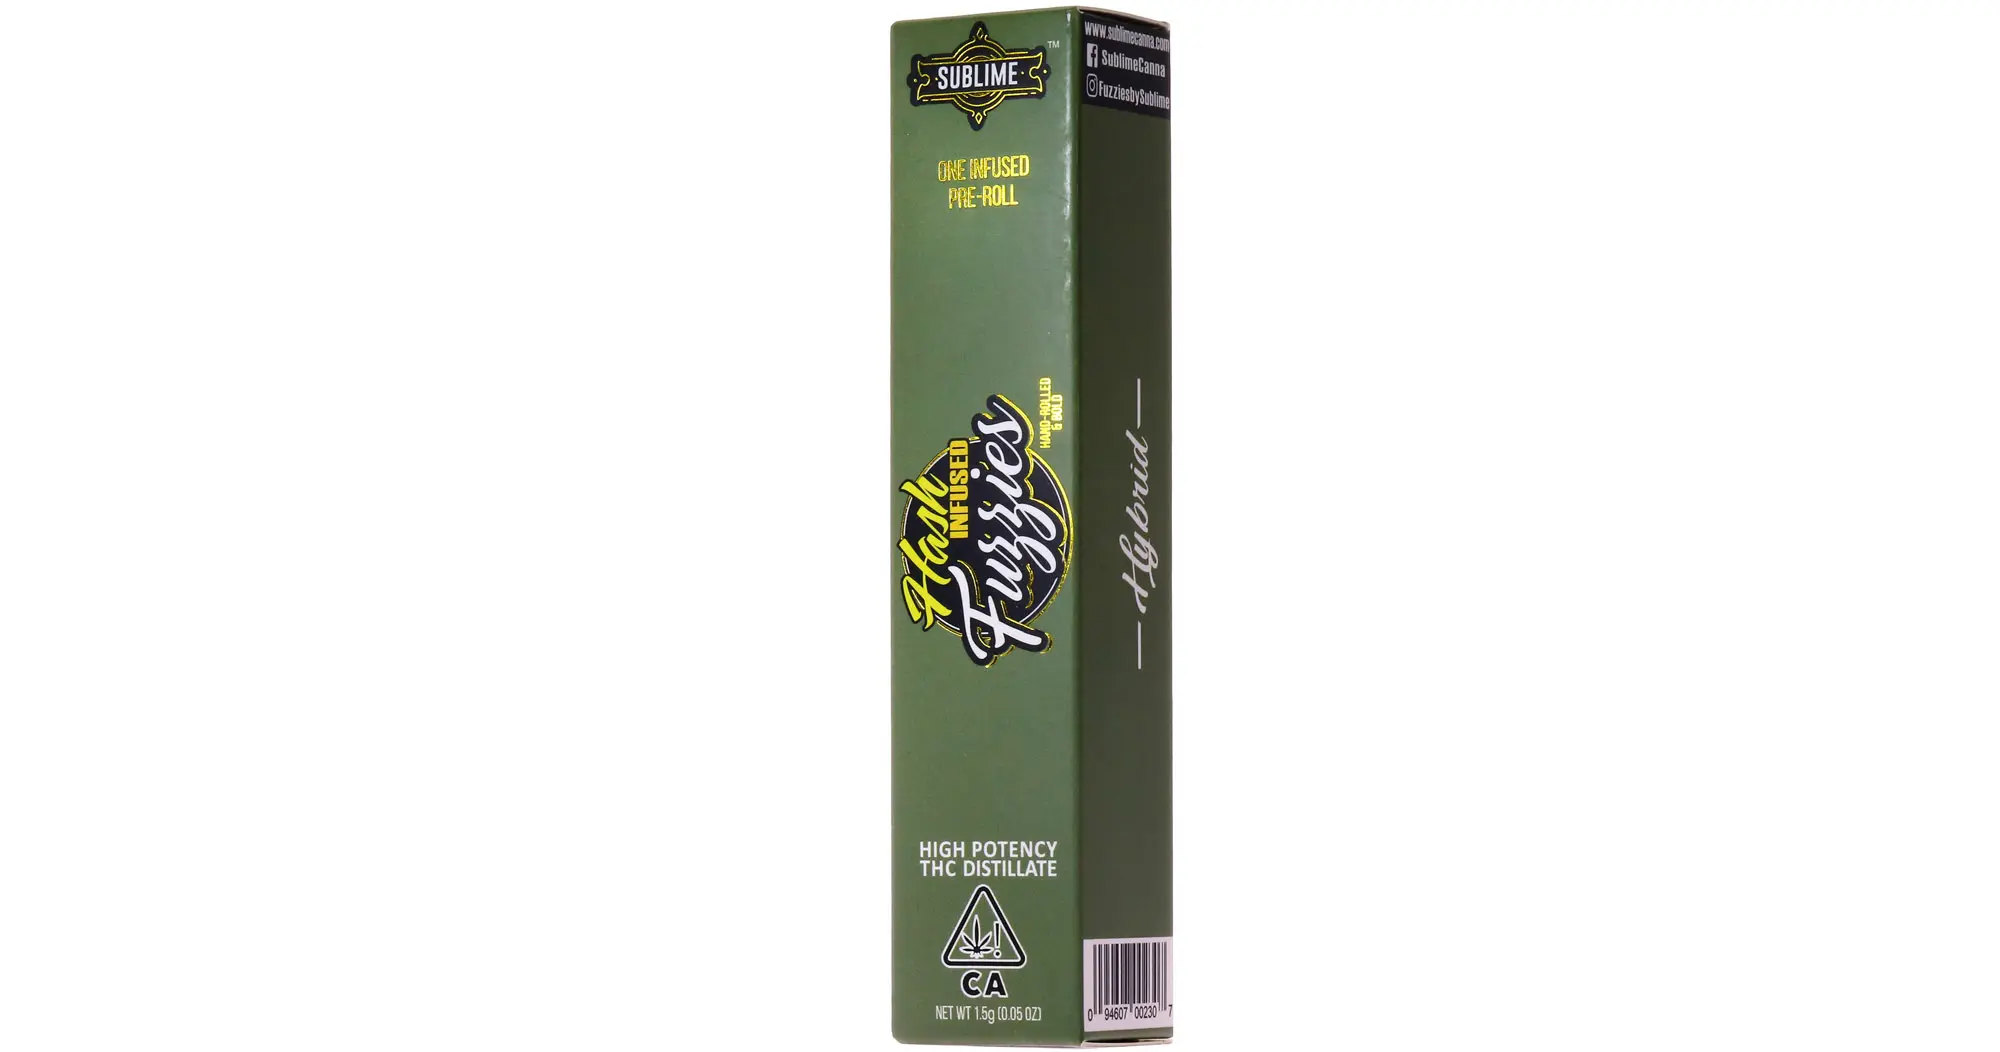 Sour Moon Rocks Live Resin Infused King Size Pre-Roll